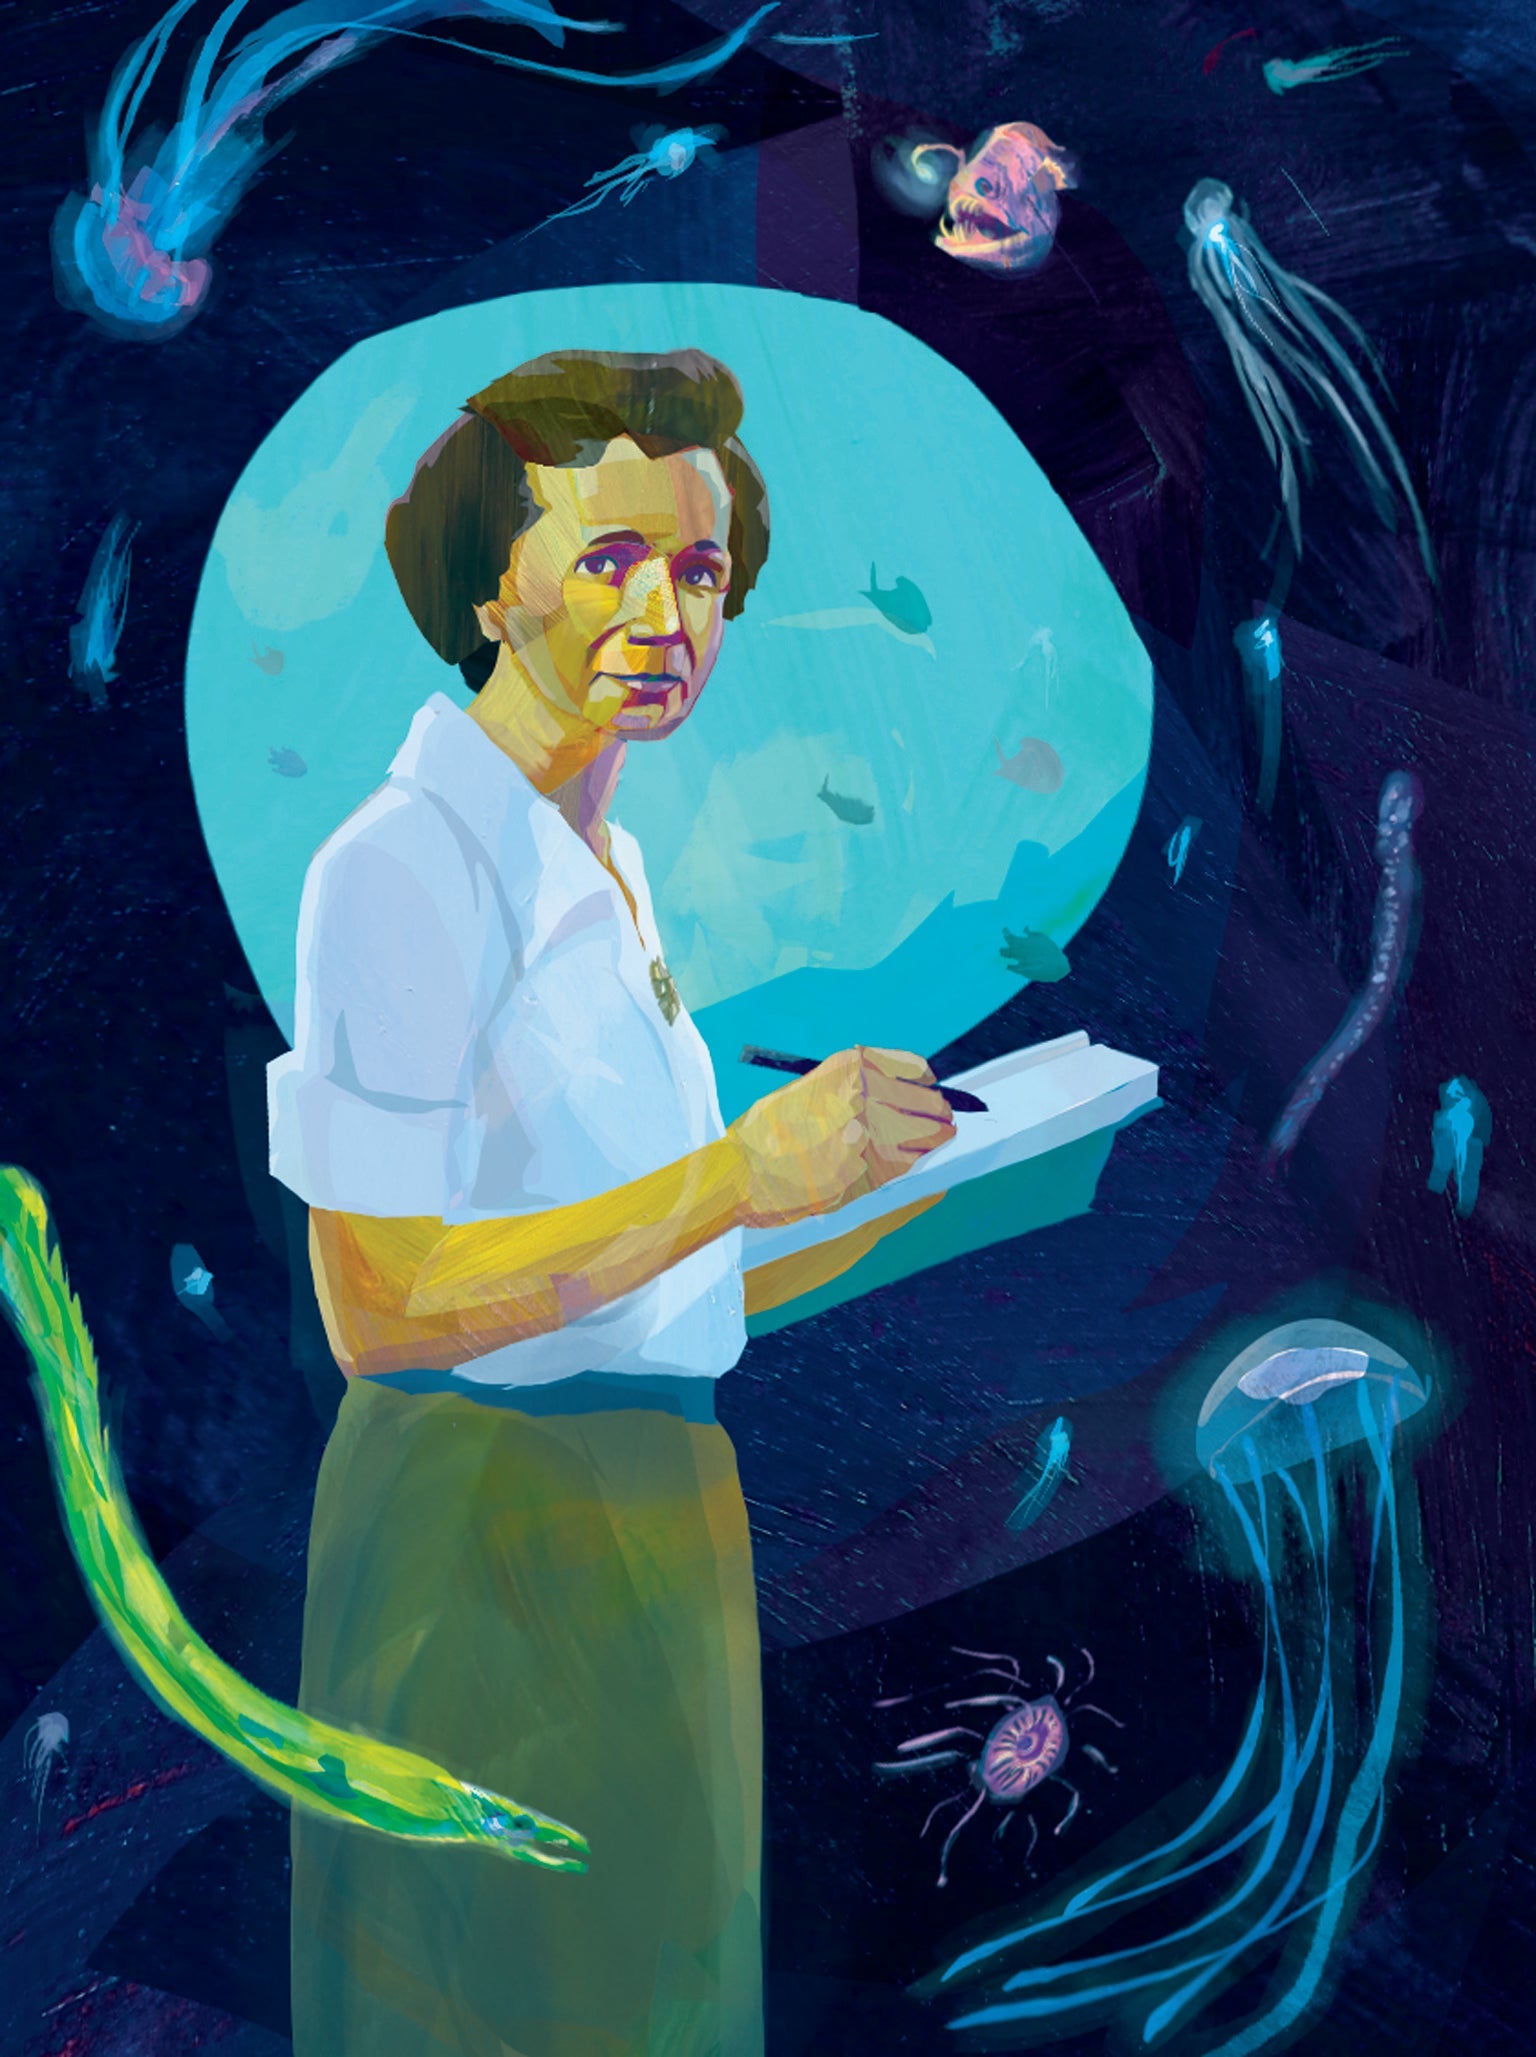 Rachel Carson's Explorations of the Sea, the Human Relationship with Elephants, and More thumbnail